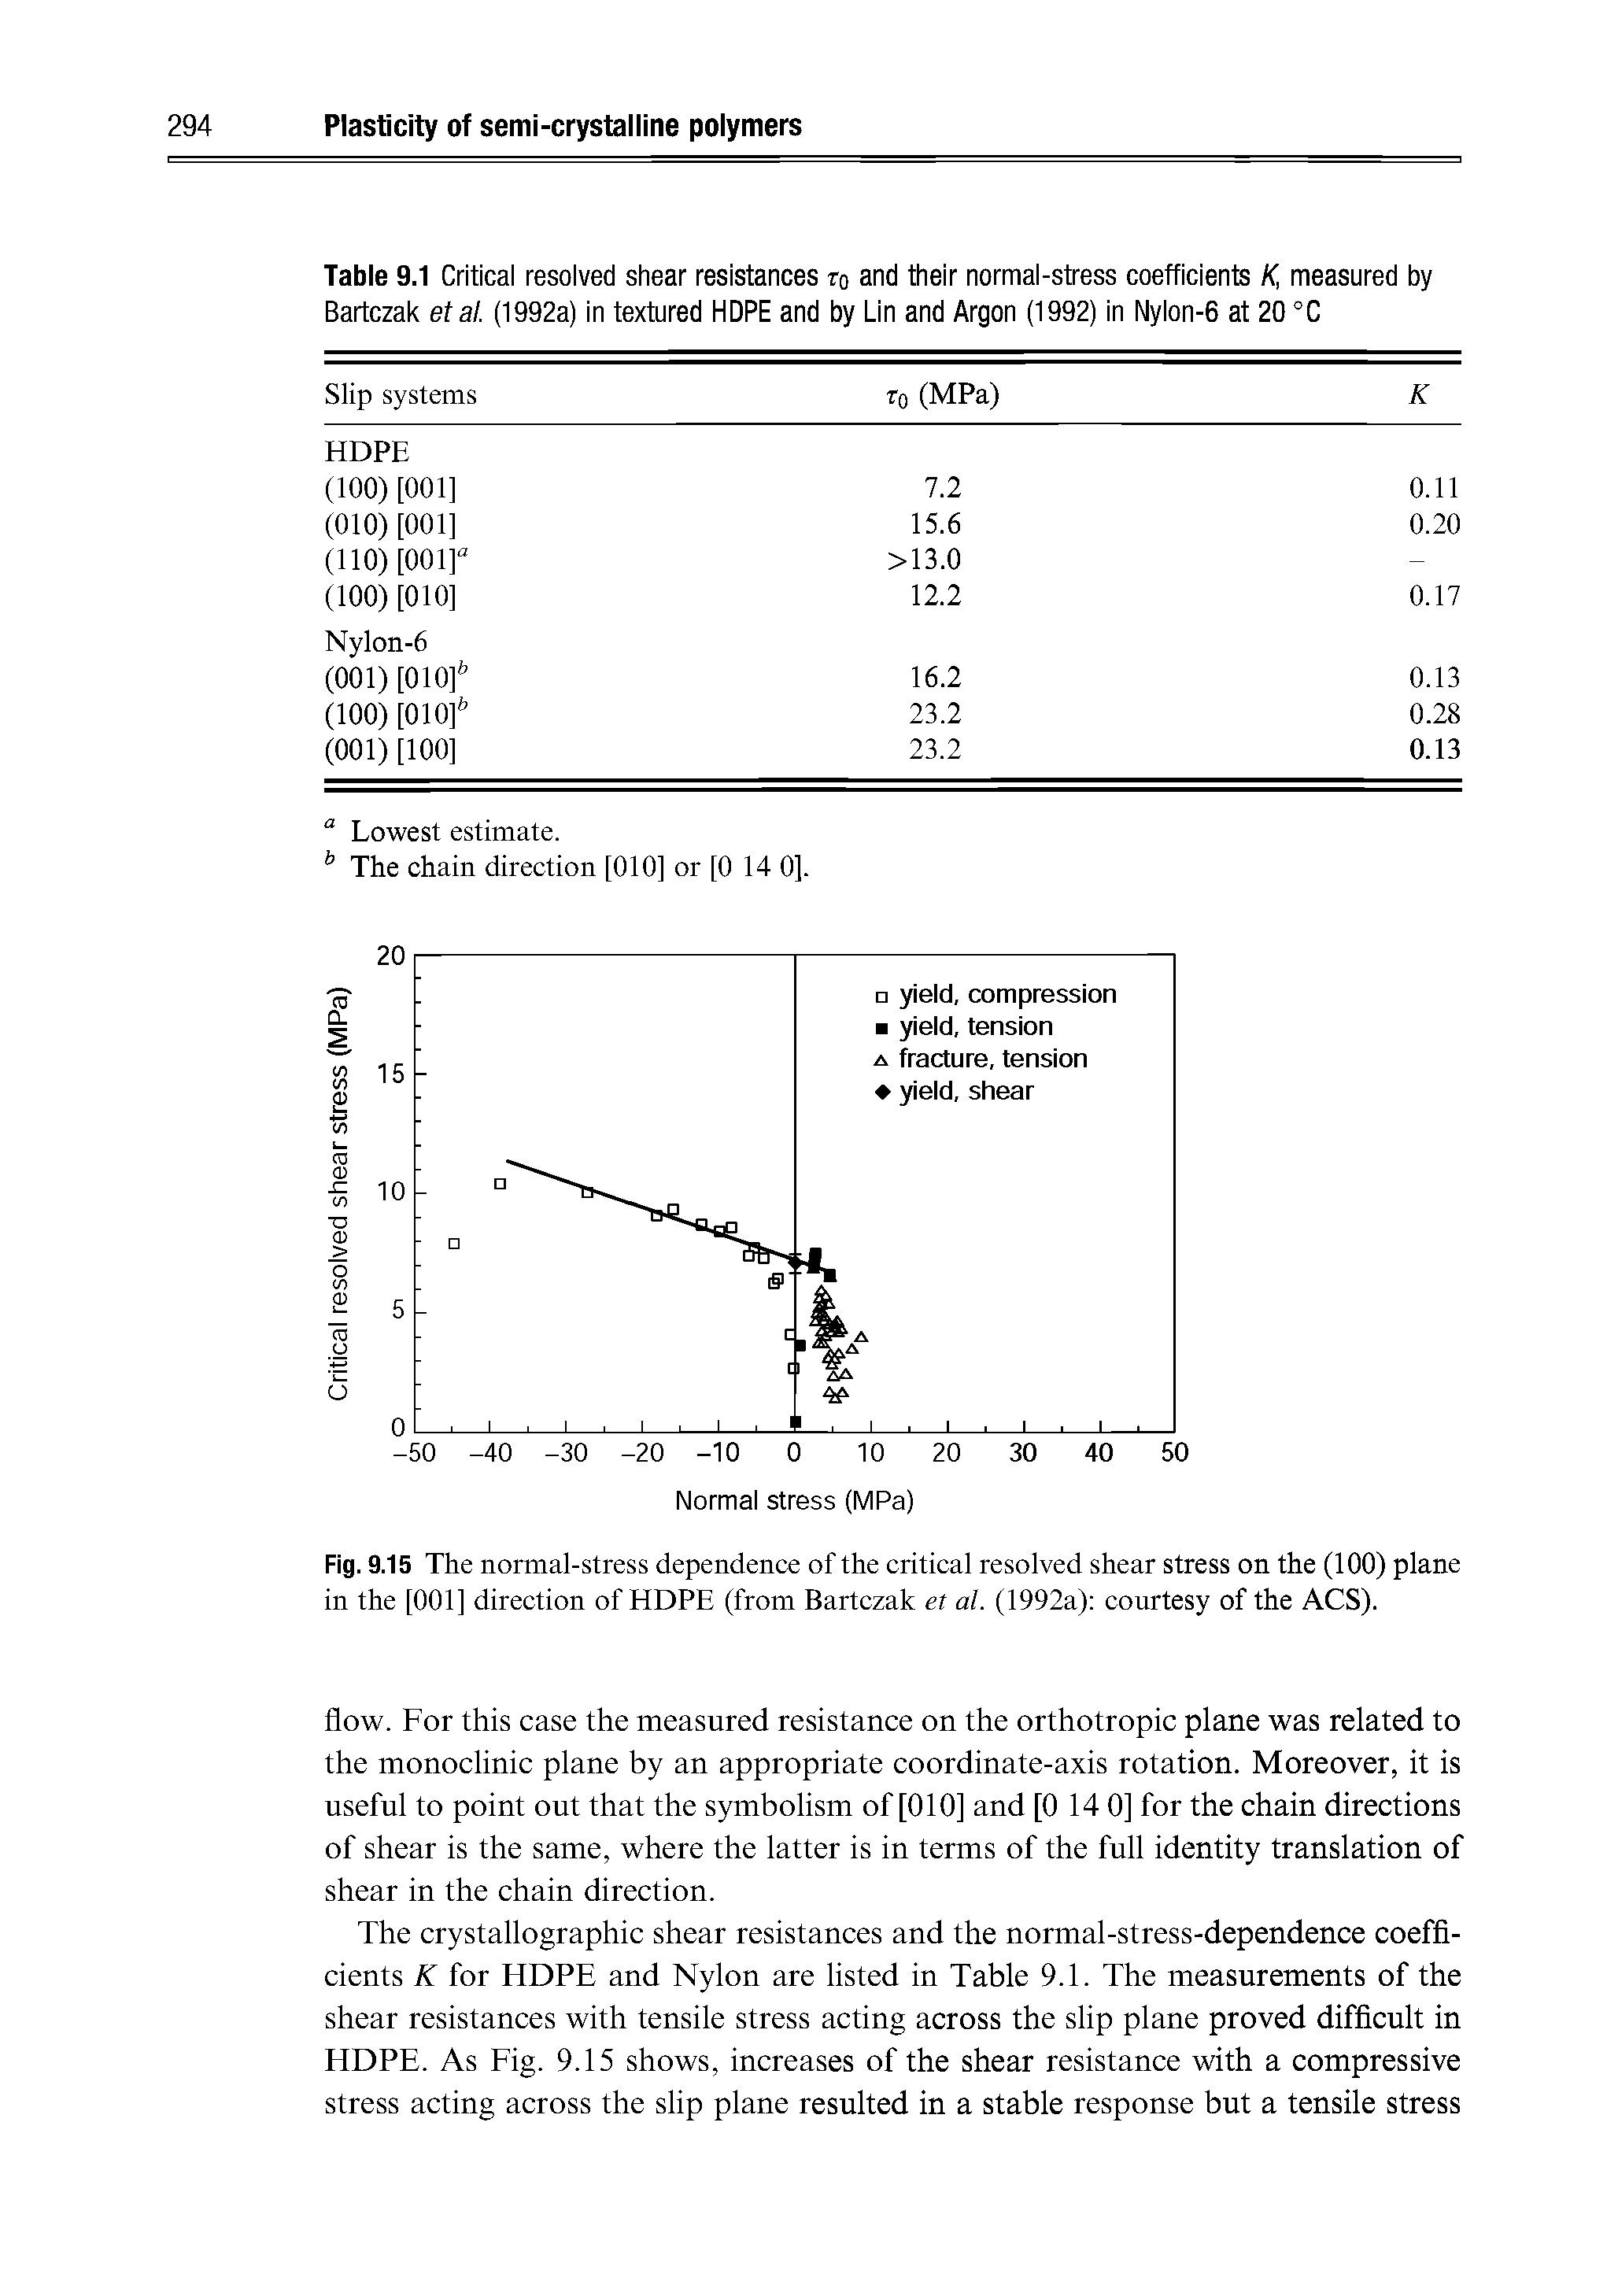 Fig. 9.15 The normal-stress dependence of the critical resolved shear stress on the (100) plane in the [001] direction of HDPE (from Bartczak et al. (1992a) courtesy of the ACS).